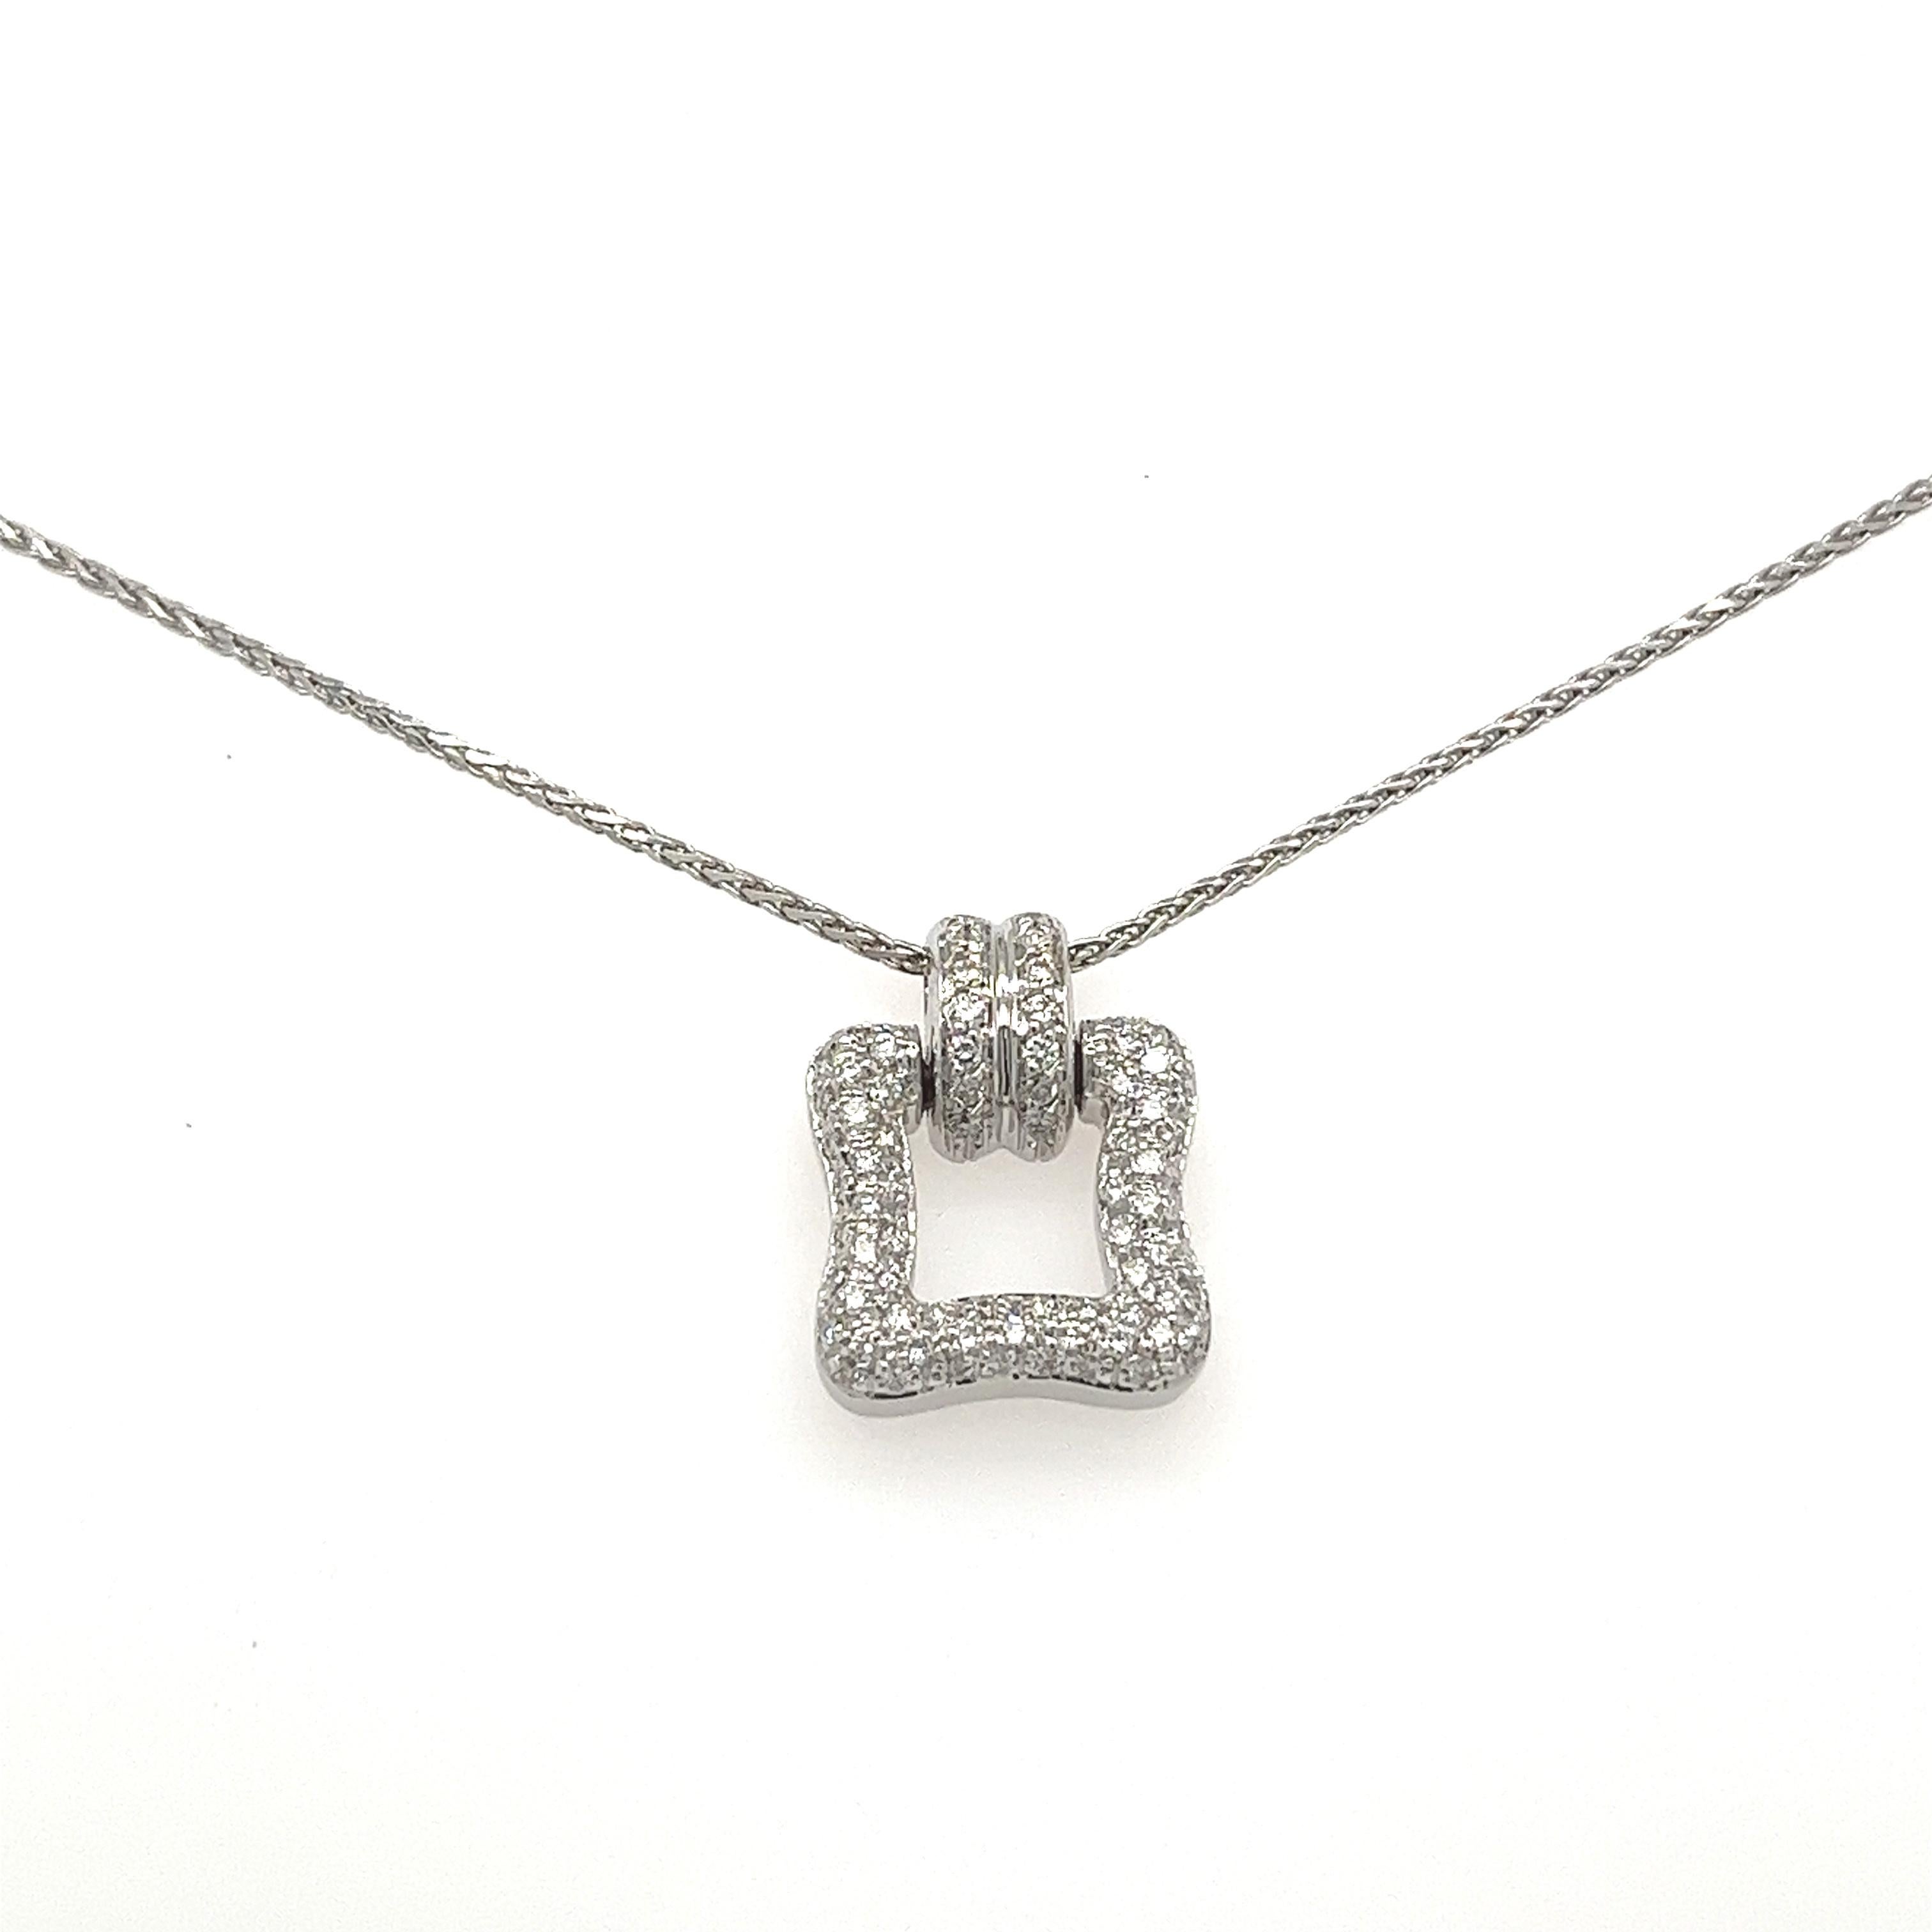 Shop this dainty square-shaped natural diamond pendant, set in 18k white gold and paired with a 14k white gold wheat style chain. A minimalist design but a grand gesture. Double rhodium plated with a polished finish for extra sparkle and shine.